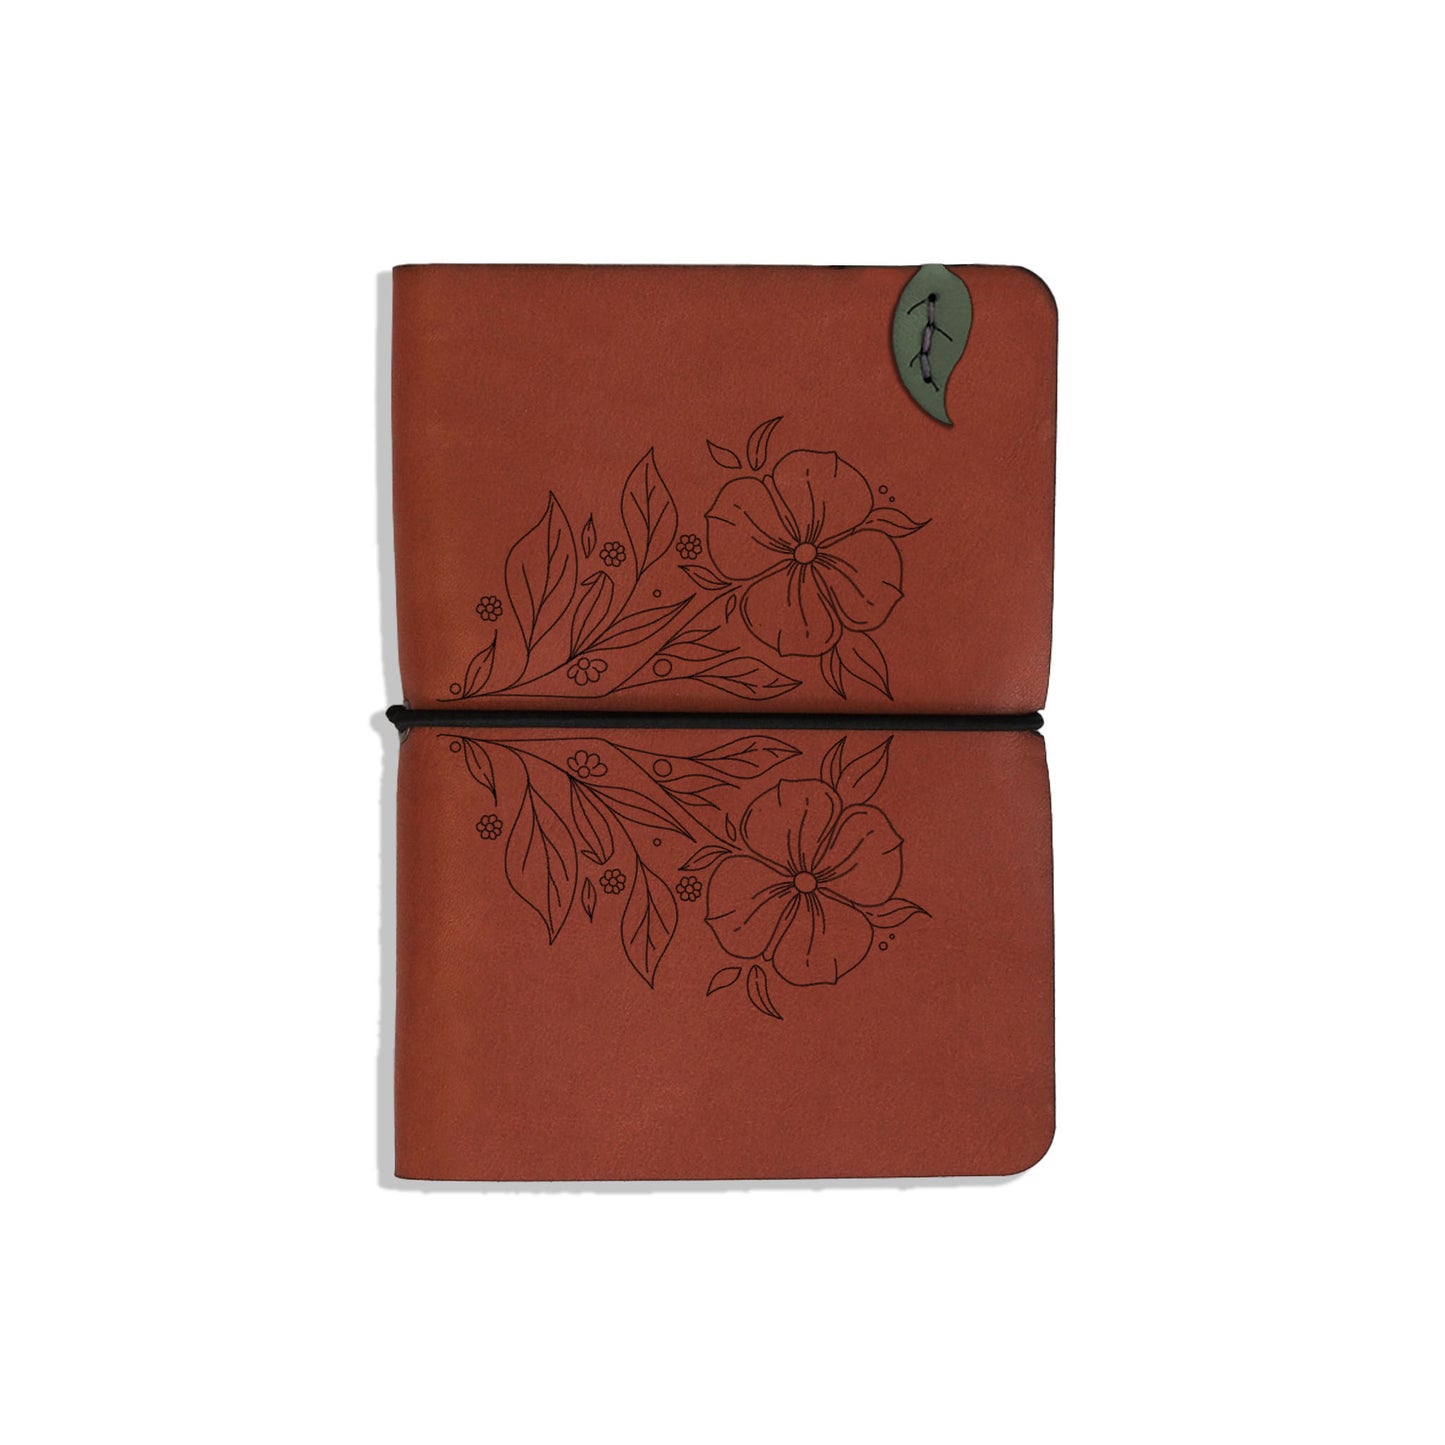 A6 Leather Notebook Cover - Floral Range